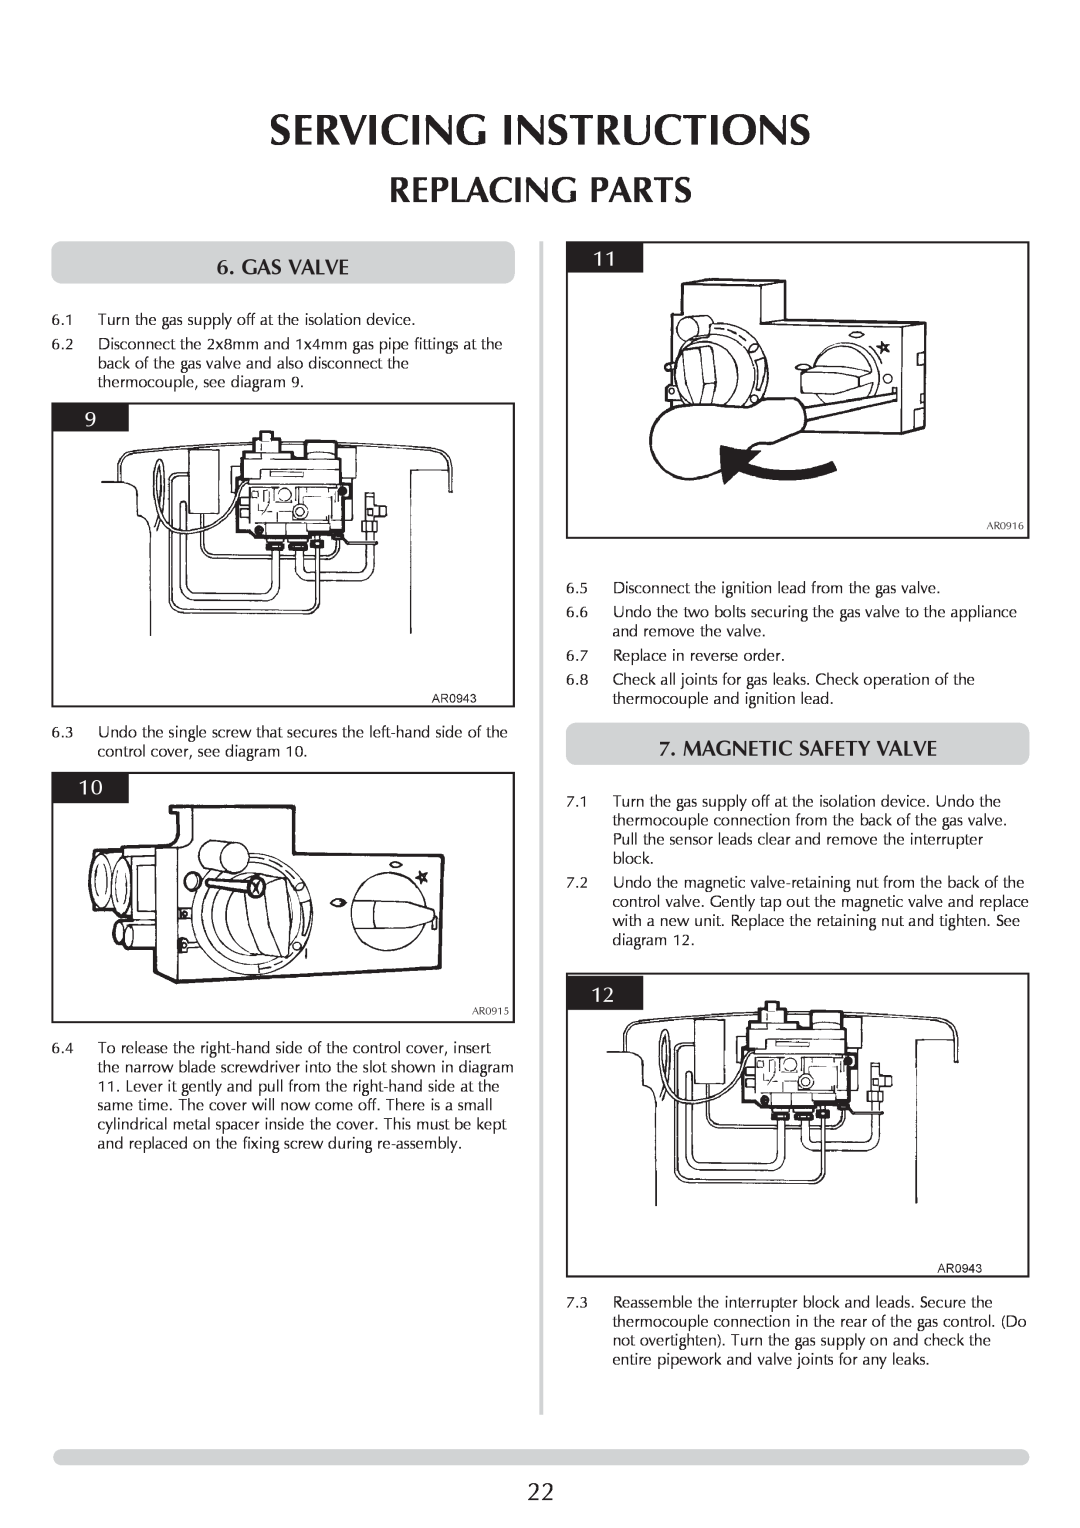 Stovax 8518-P8518, CLARENDON 8541-P8541 manual Servicing Instructions, Replacing Parts, Gas Valve, Magnetic Safety Valve 